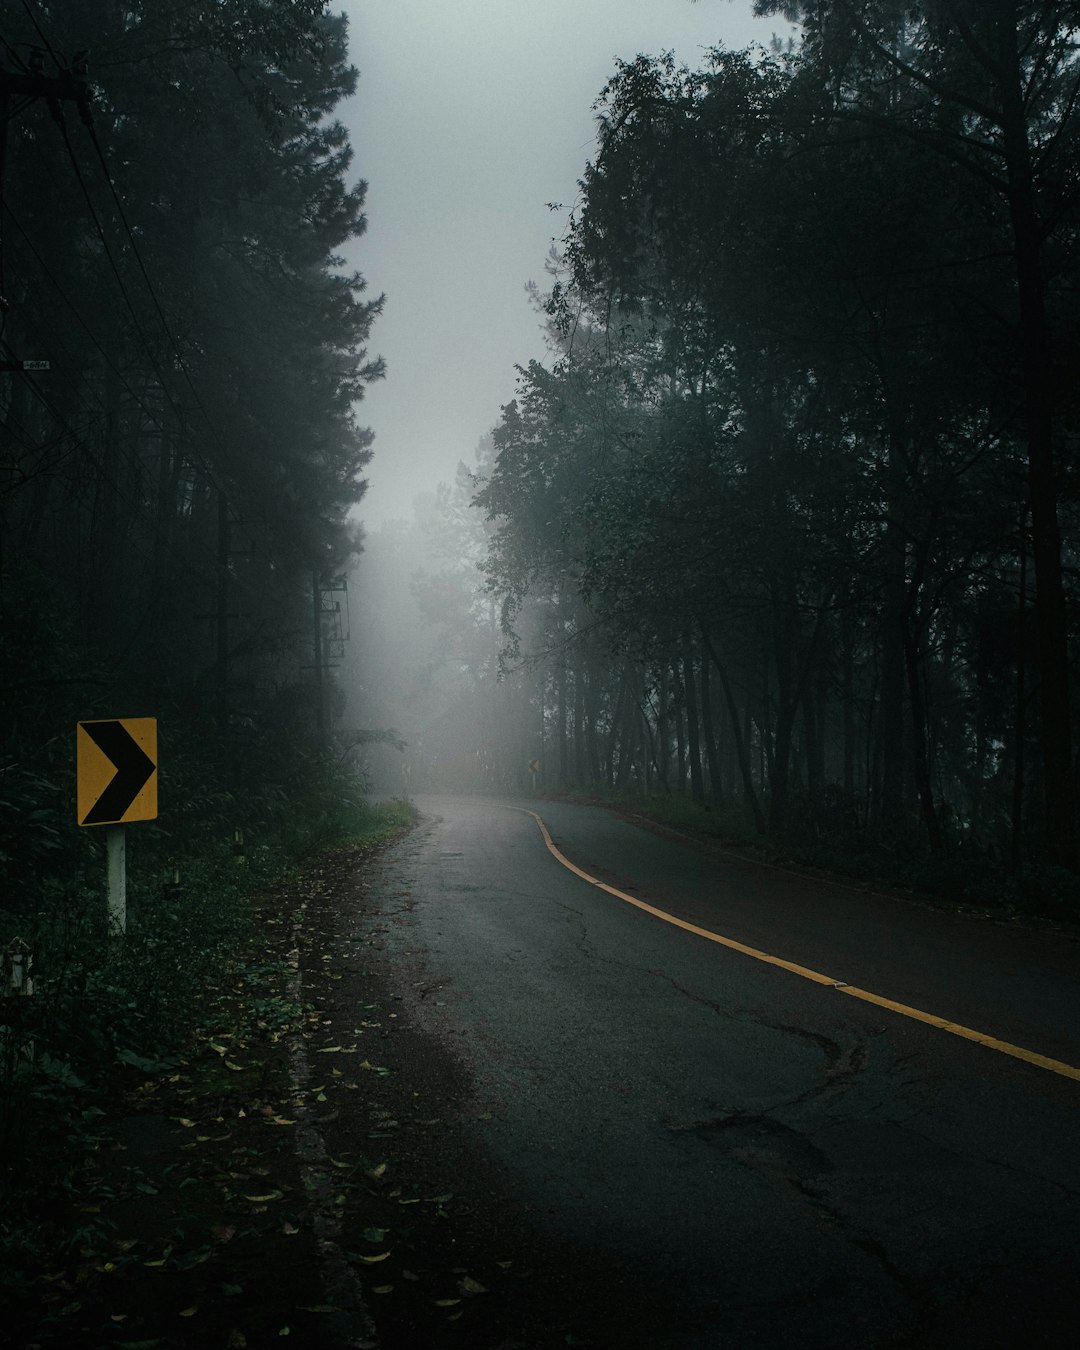 yellow and black road sign on road between trees covered with fog